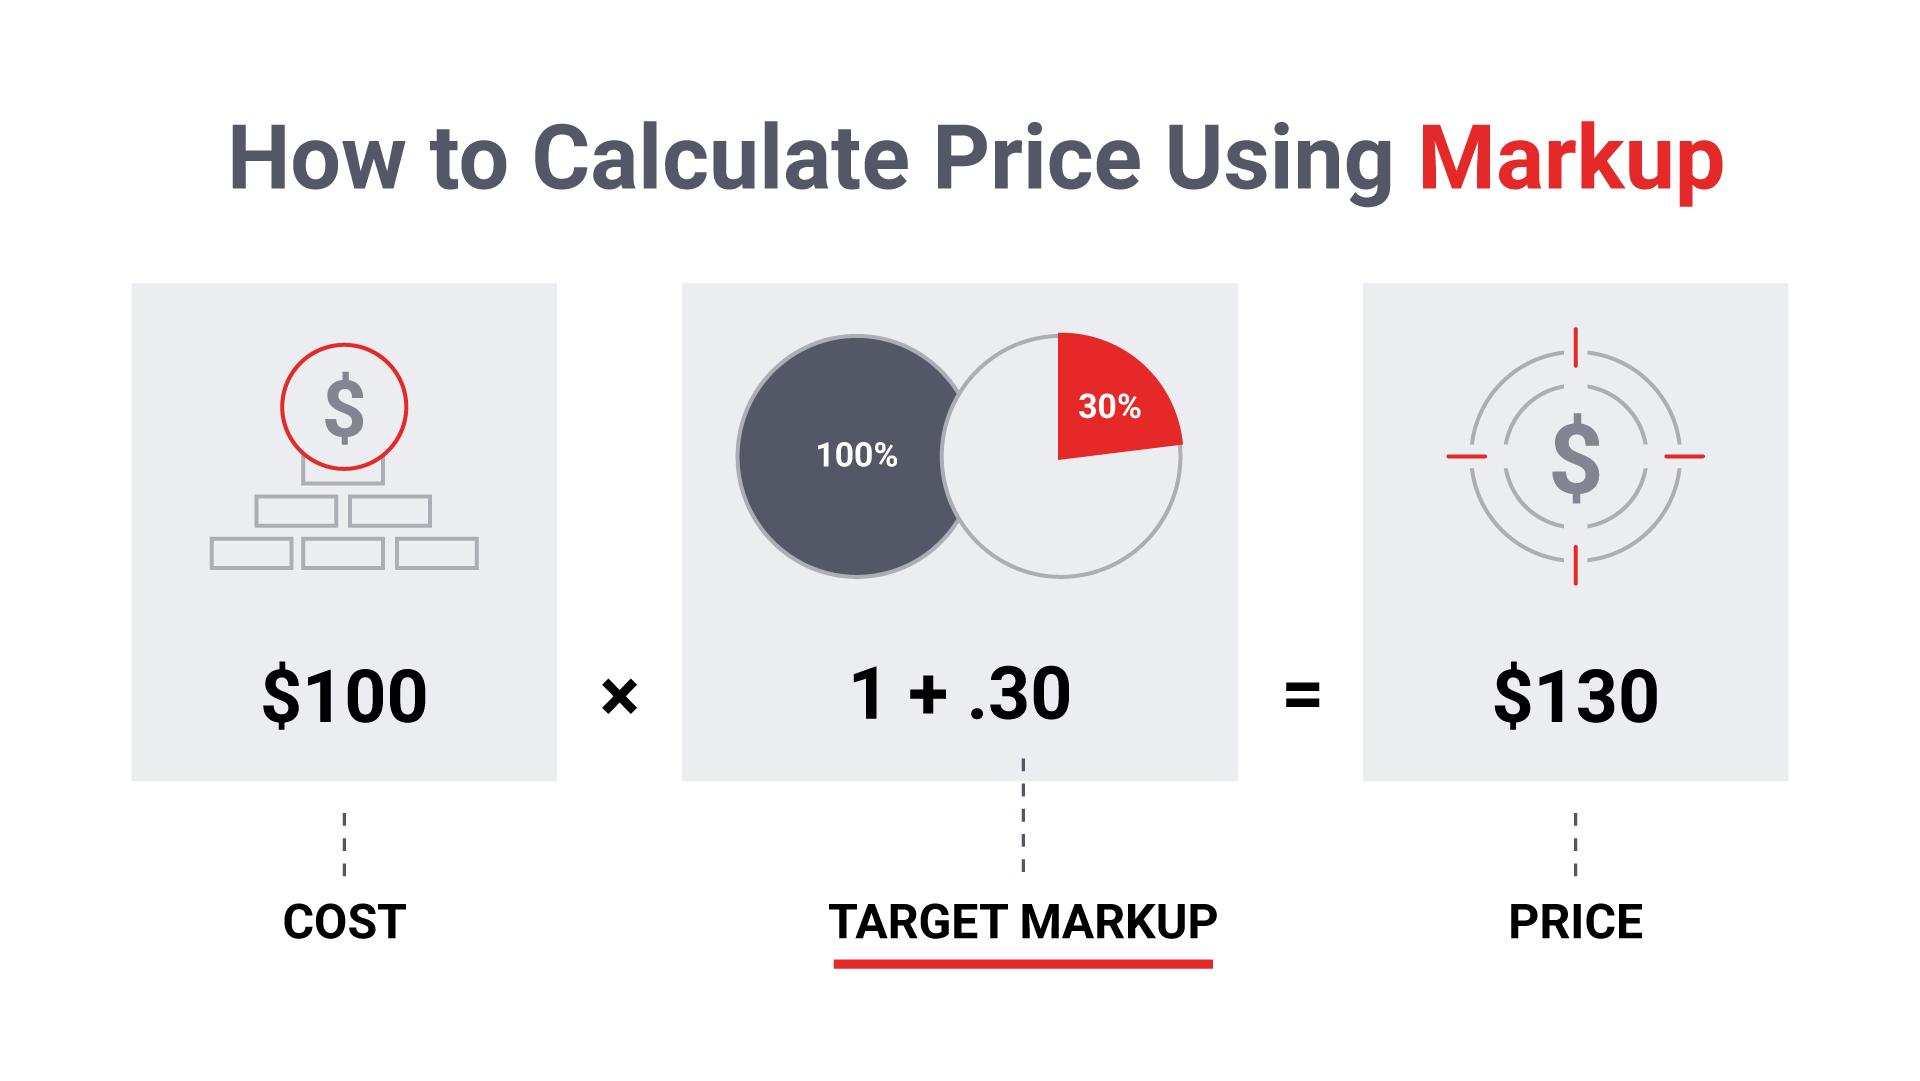 How to calculate price using markup